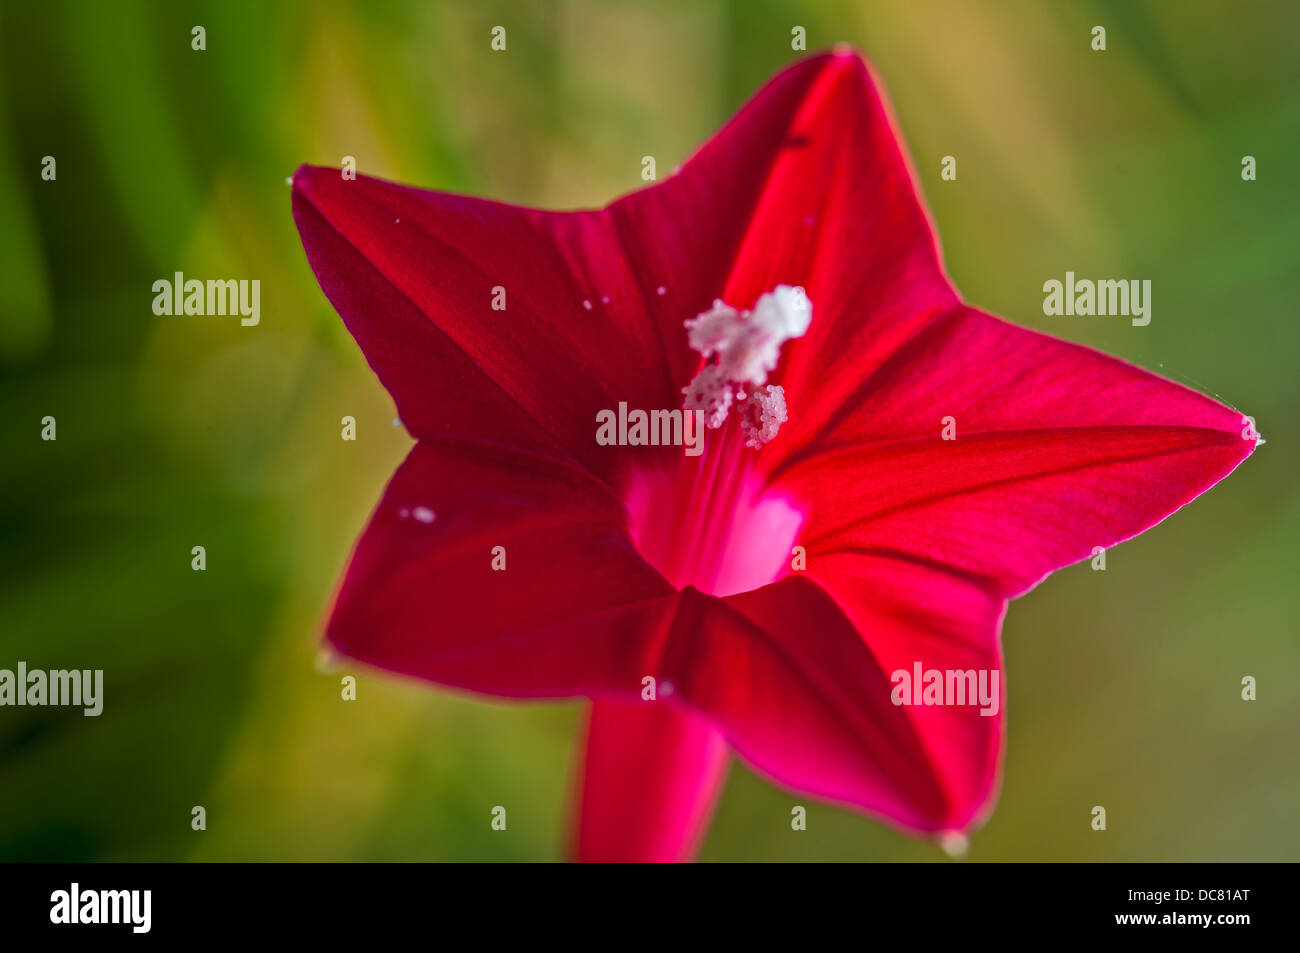 Ipomoea quamoclit, cypress vine showing different parts of the flower, flower, red, isolated on green background Stock Photo